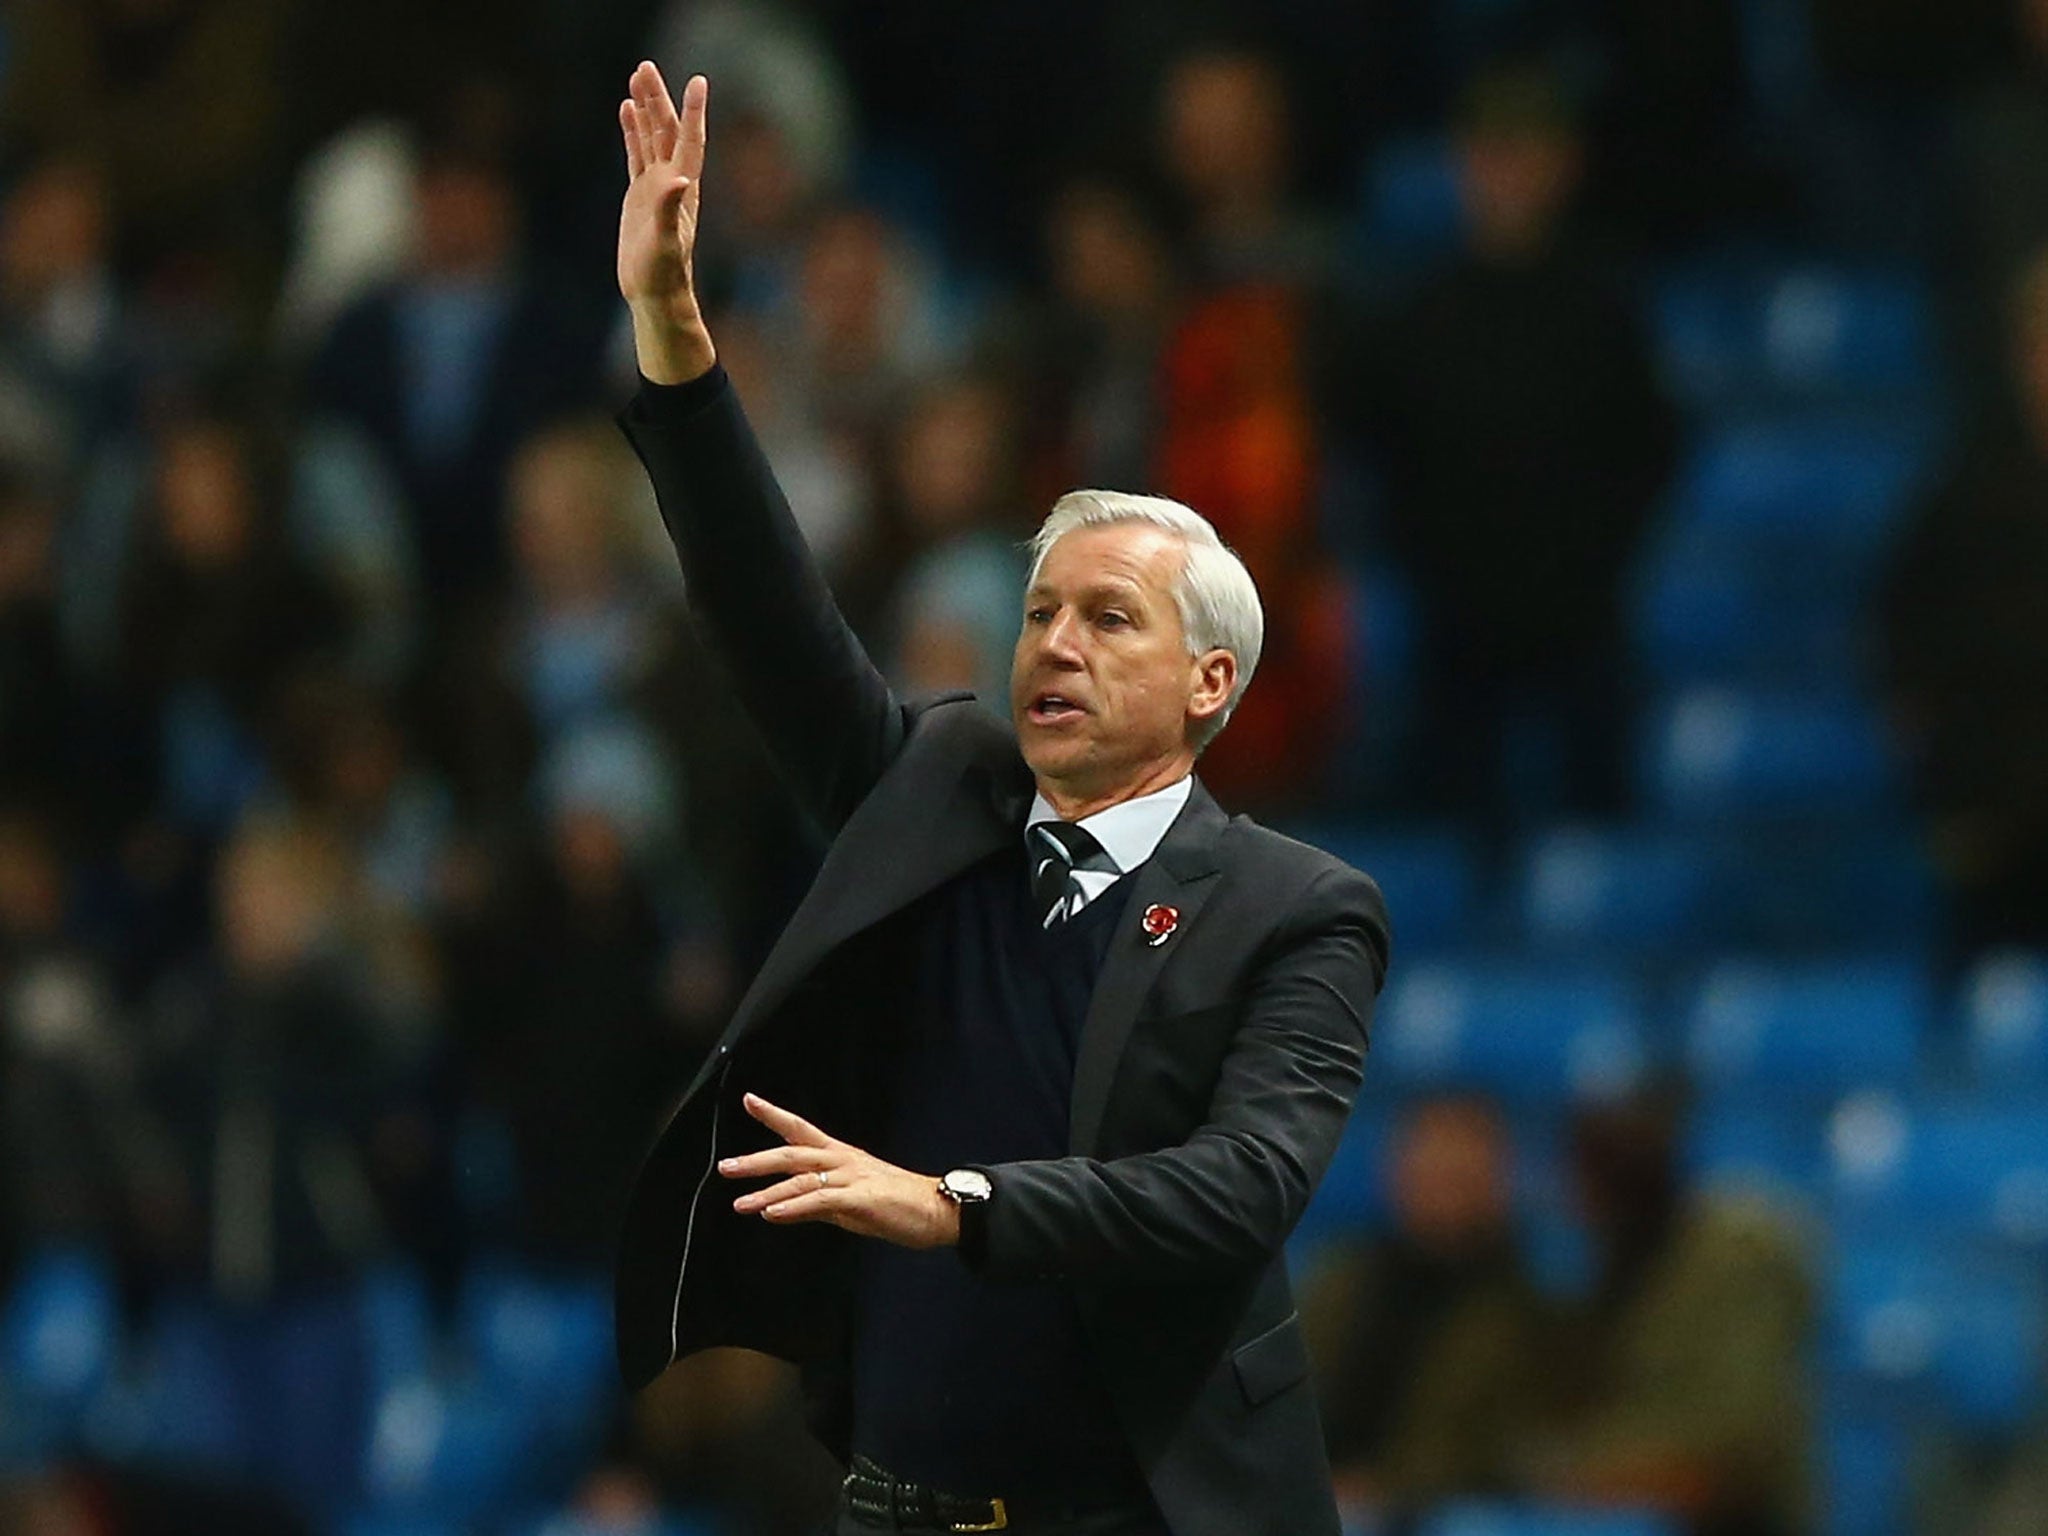 Alan Pardew makes a gesture on the touchline